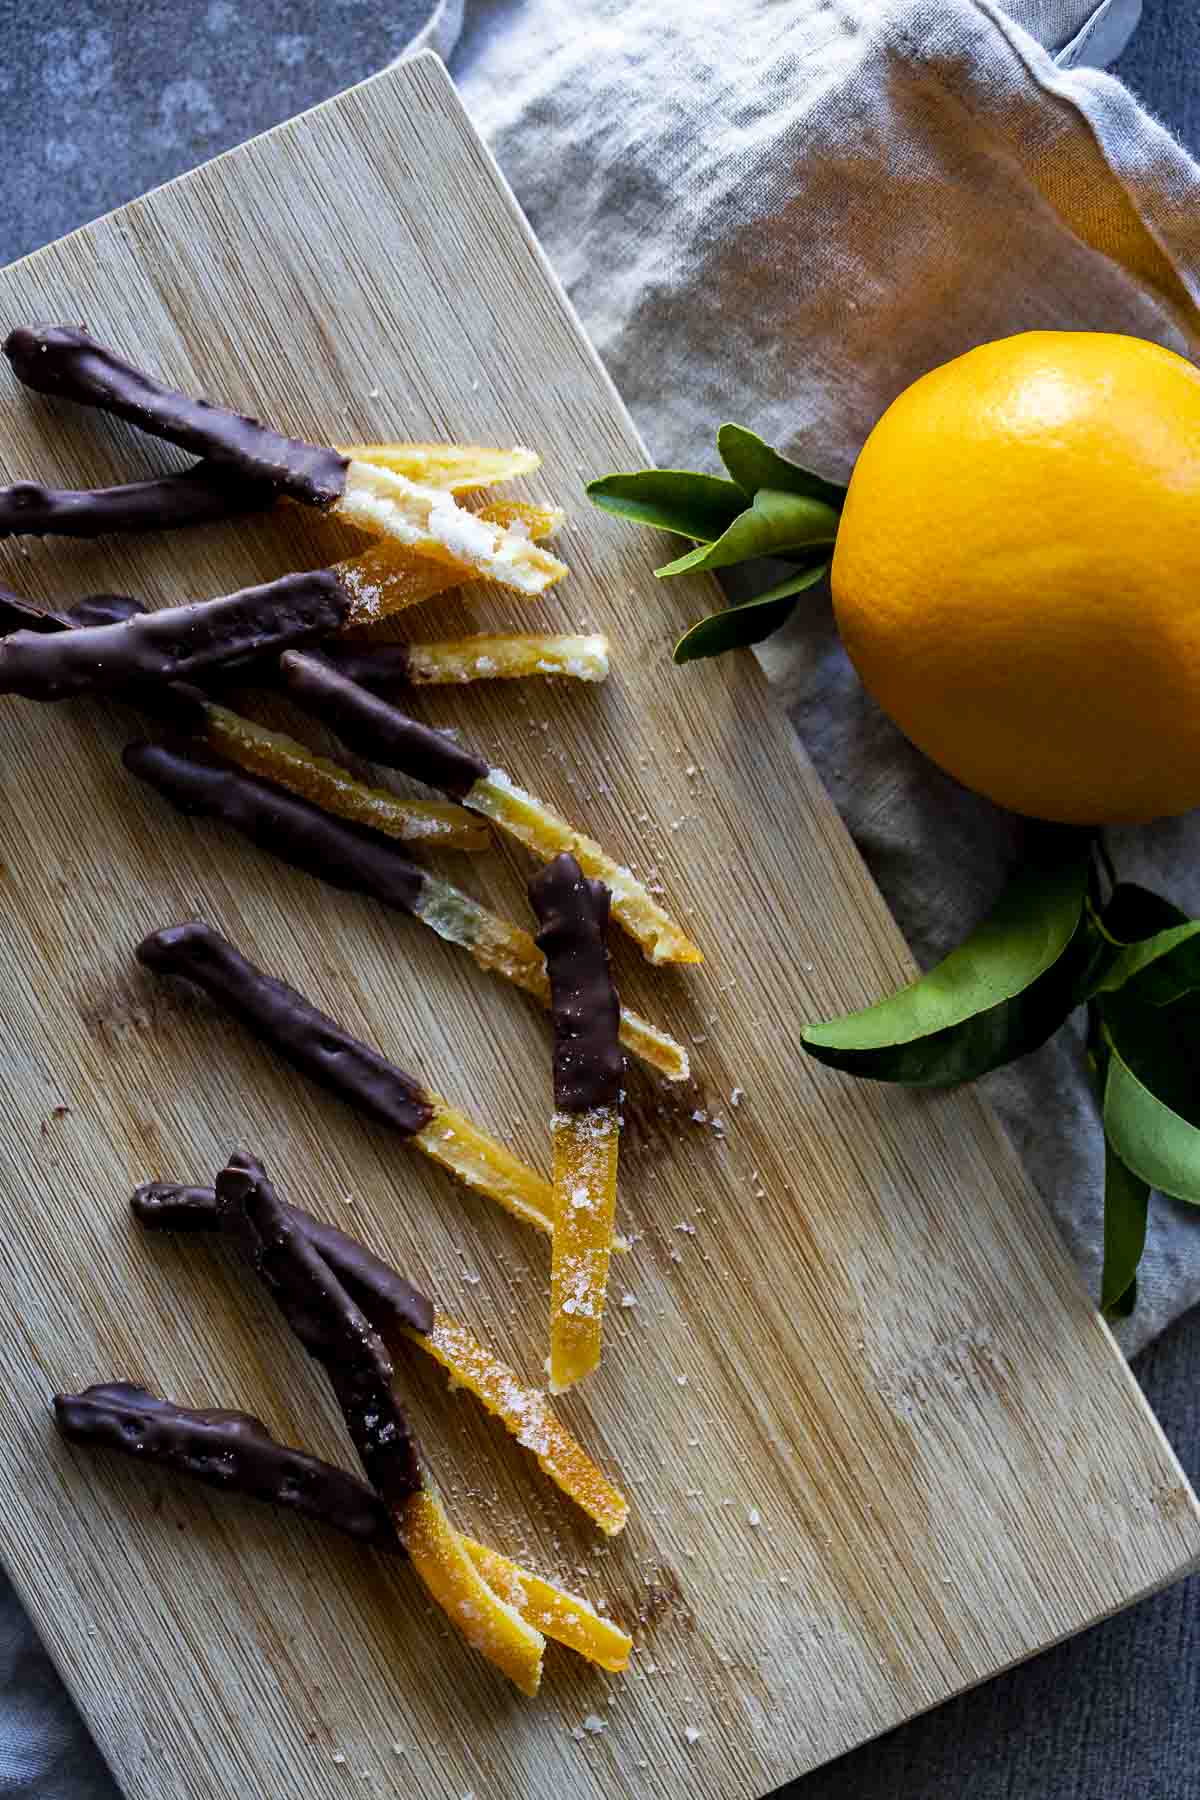 sliced orange peels coated in chocolate with an orange on the side